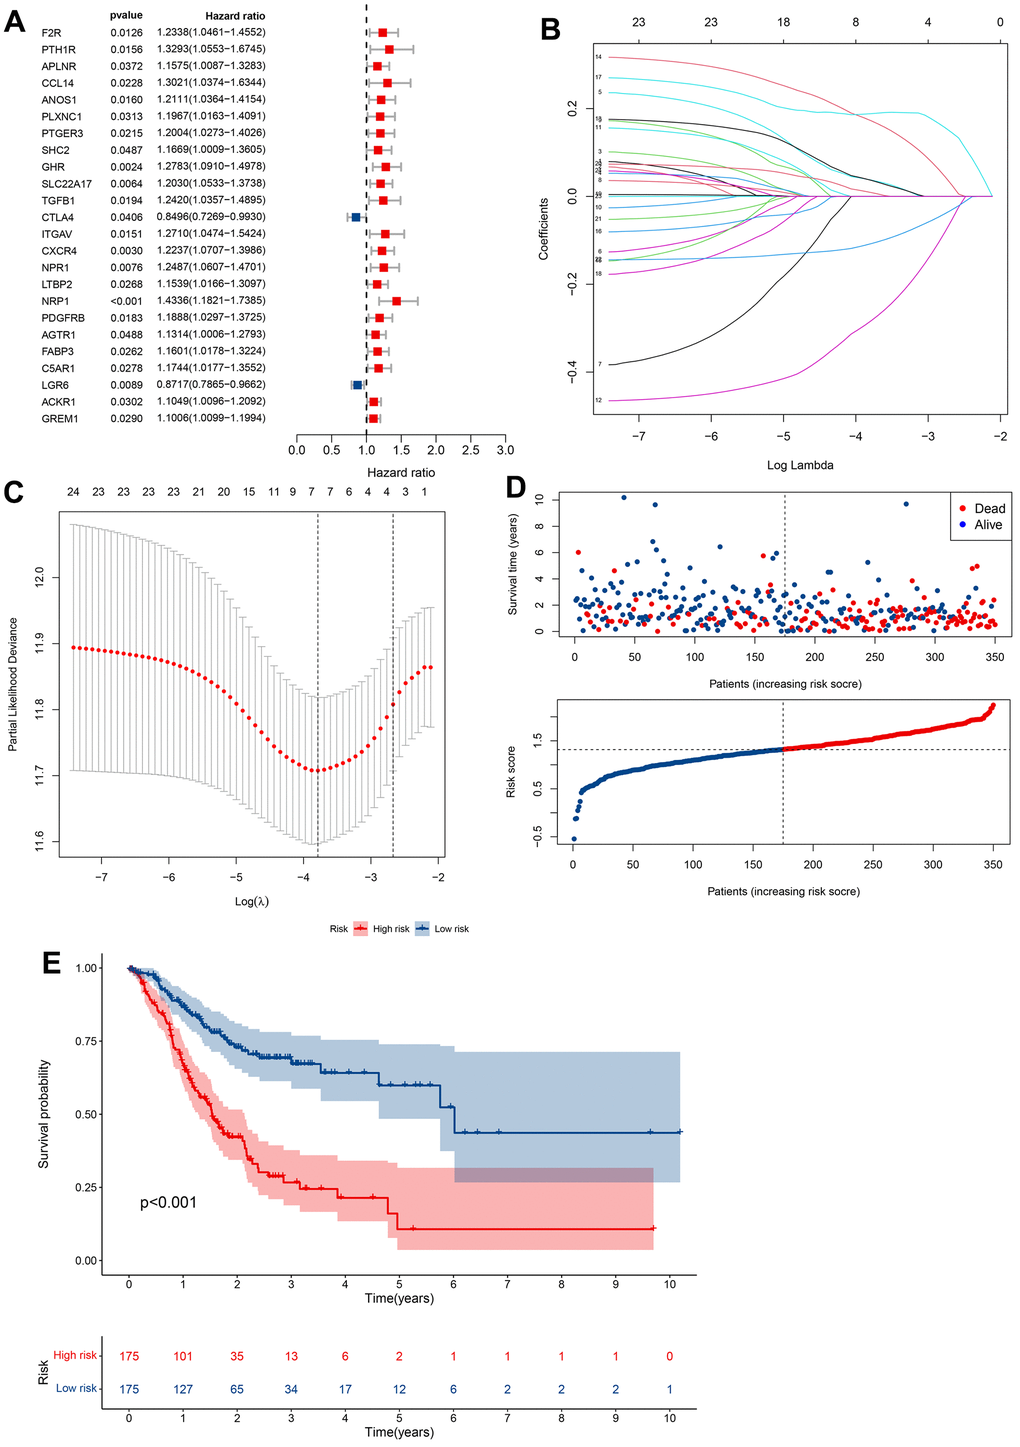 Construction of prognostic models based on CRIGs. (A) Identification of prognostic CRIGs for GC by univariate Cox regression analysis. (B) LASSO Cox regression analysis of the association between coefficients of genes and log(λ). (C) LASSO Cox regression analysis of the association between deviance and log(λ). (D) The survival status and survival time of GC patients ranked by risk score. (E) Kaplan-Meier analysis between high-risk groups and low-risk groups.